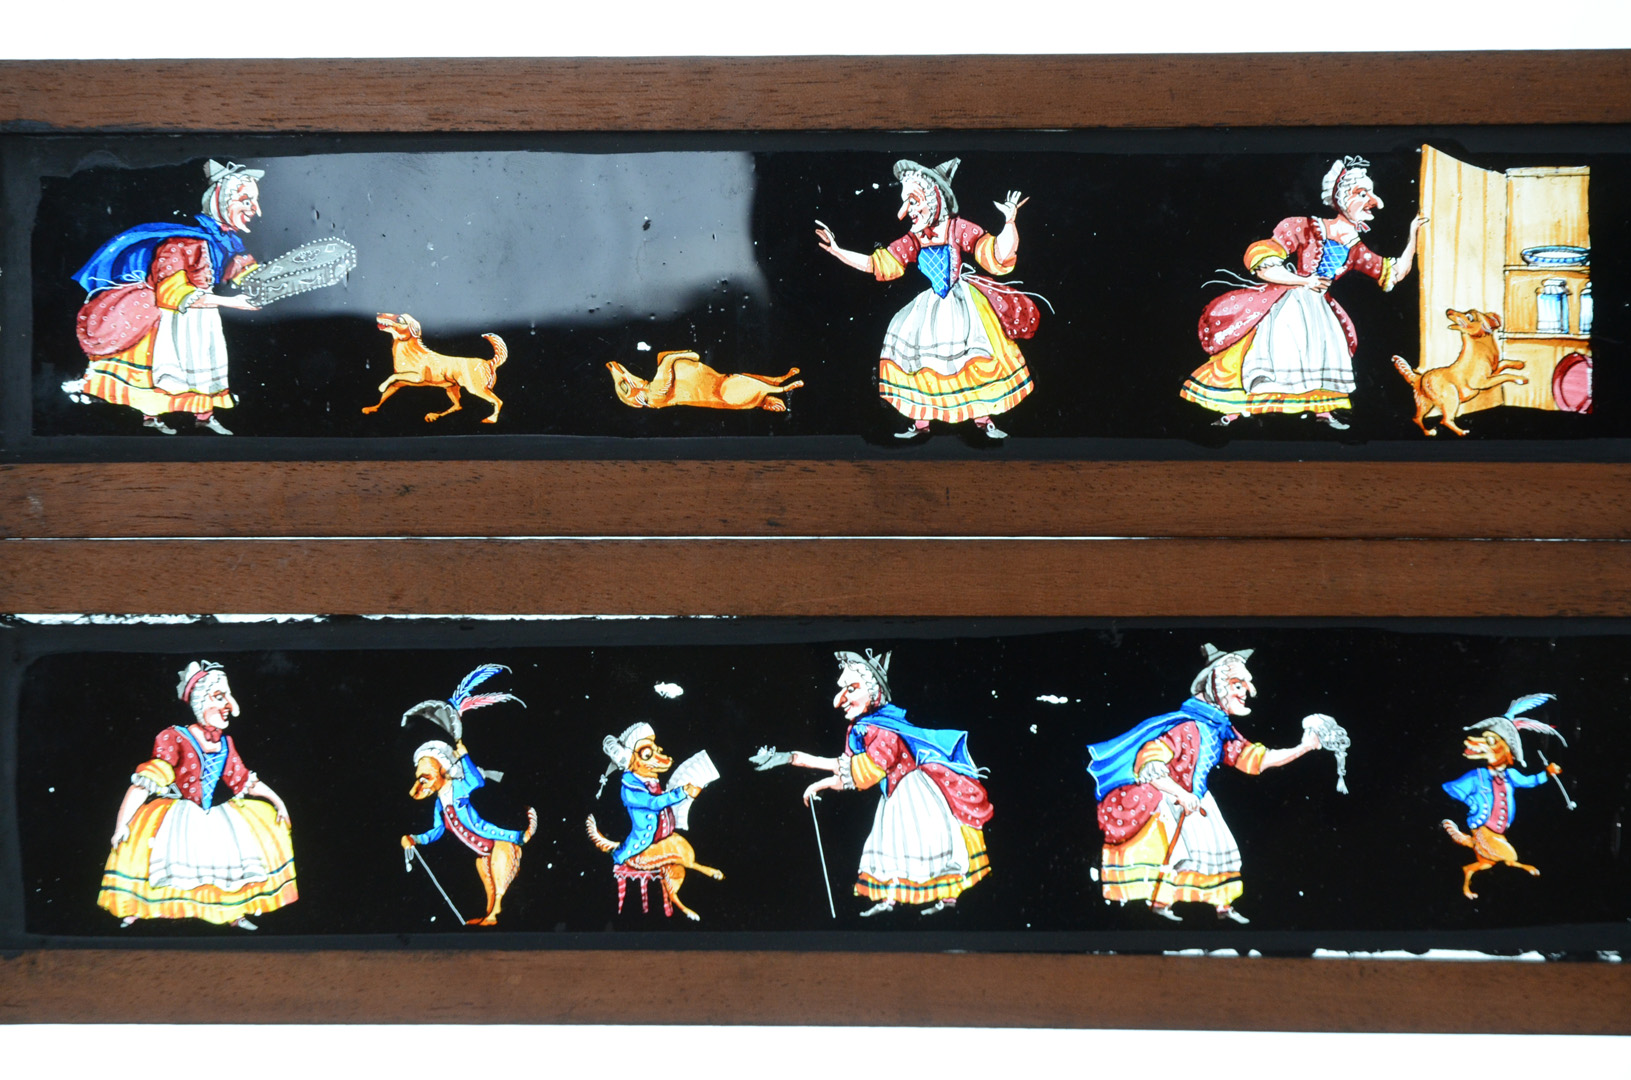 Mahogany-Mounted Magic Lantern Slides, mid to late 19th Century copper-plate/transfer print hand-